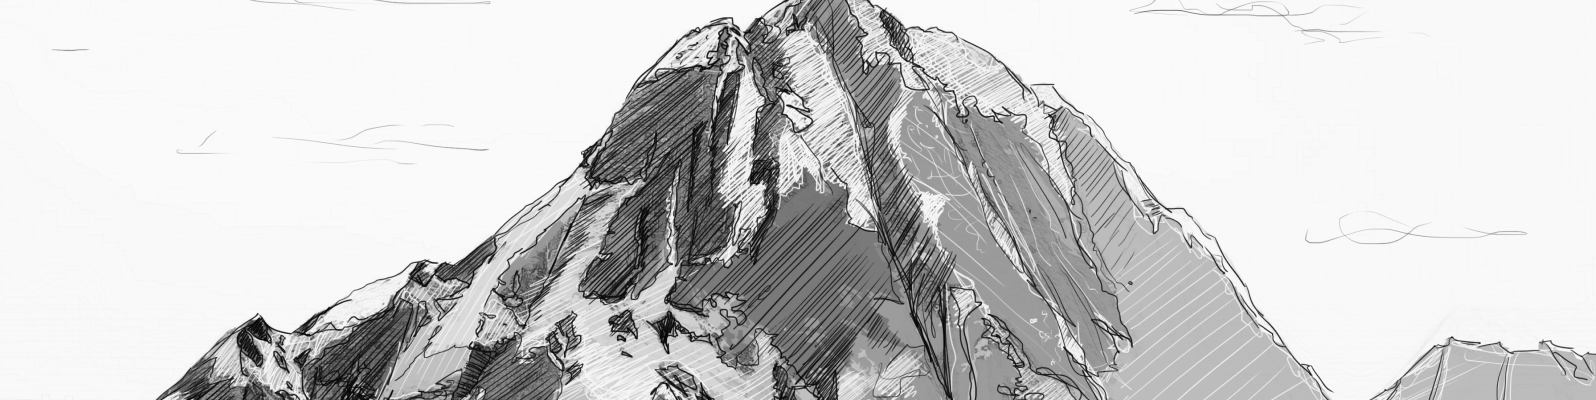 Greyscale digital sketch of the mountain featured in our 'Go Deeper' launch film.